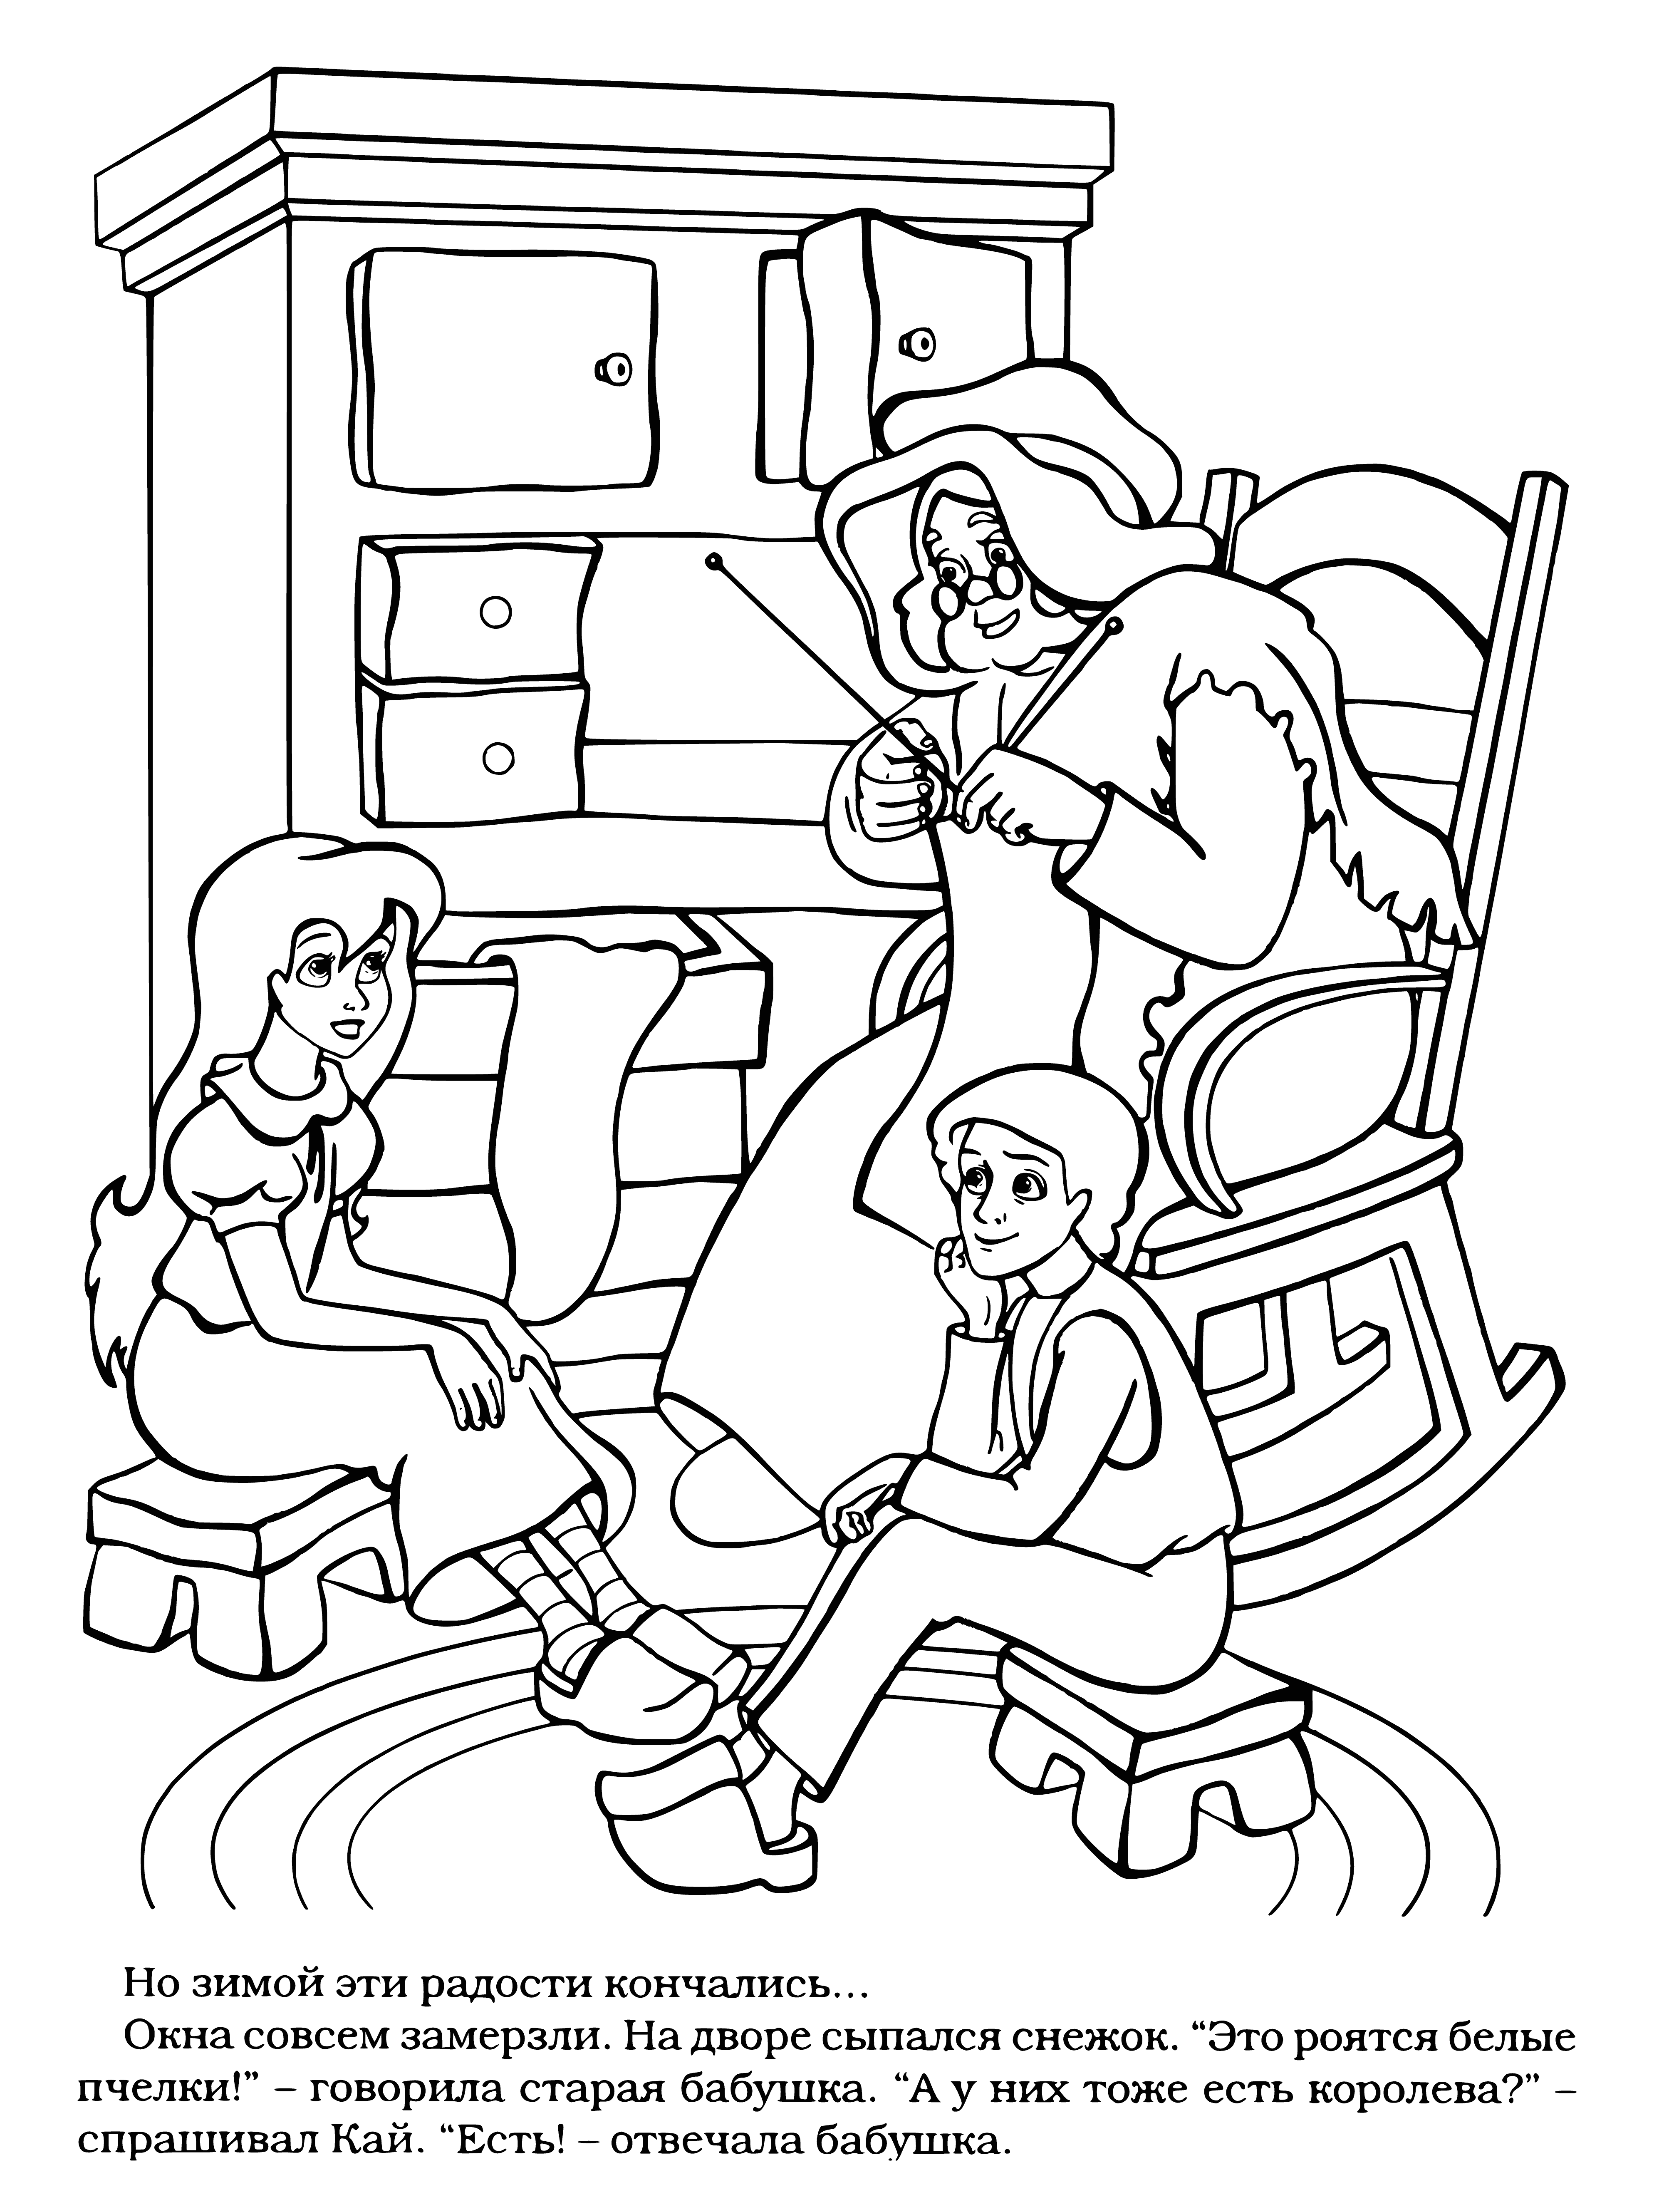 coloring page: Boy & girl, Kai & Gerda, smile while looking at a book on a river dock.